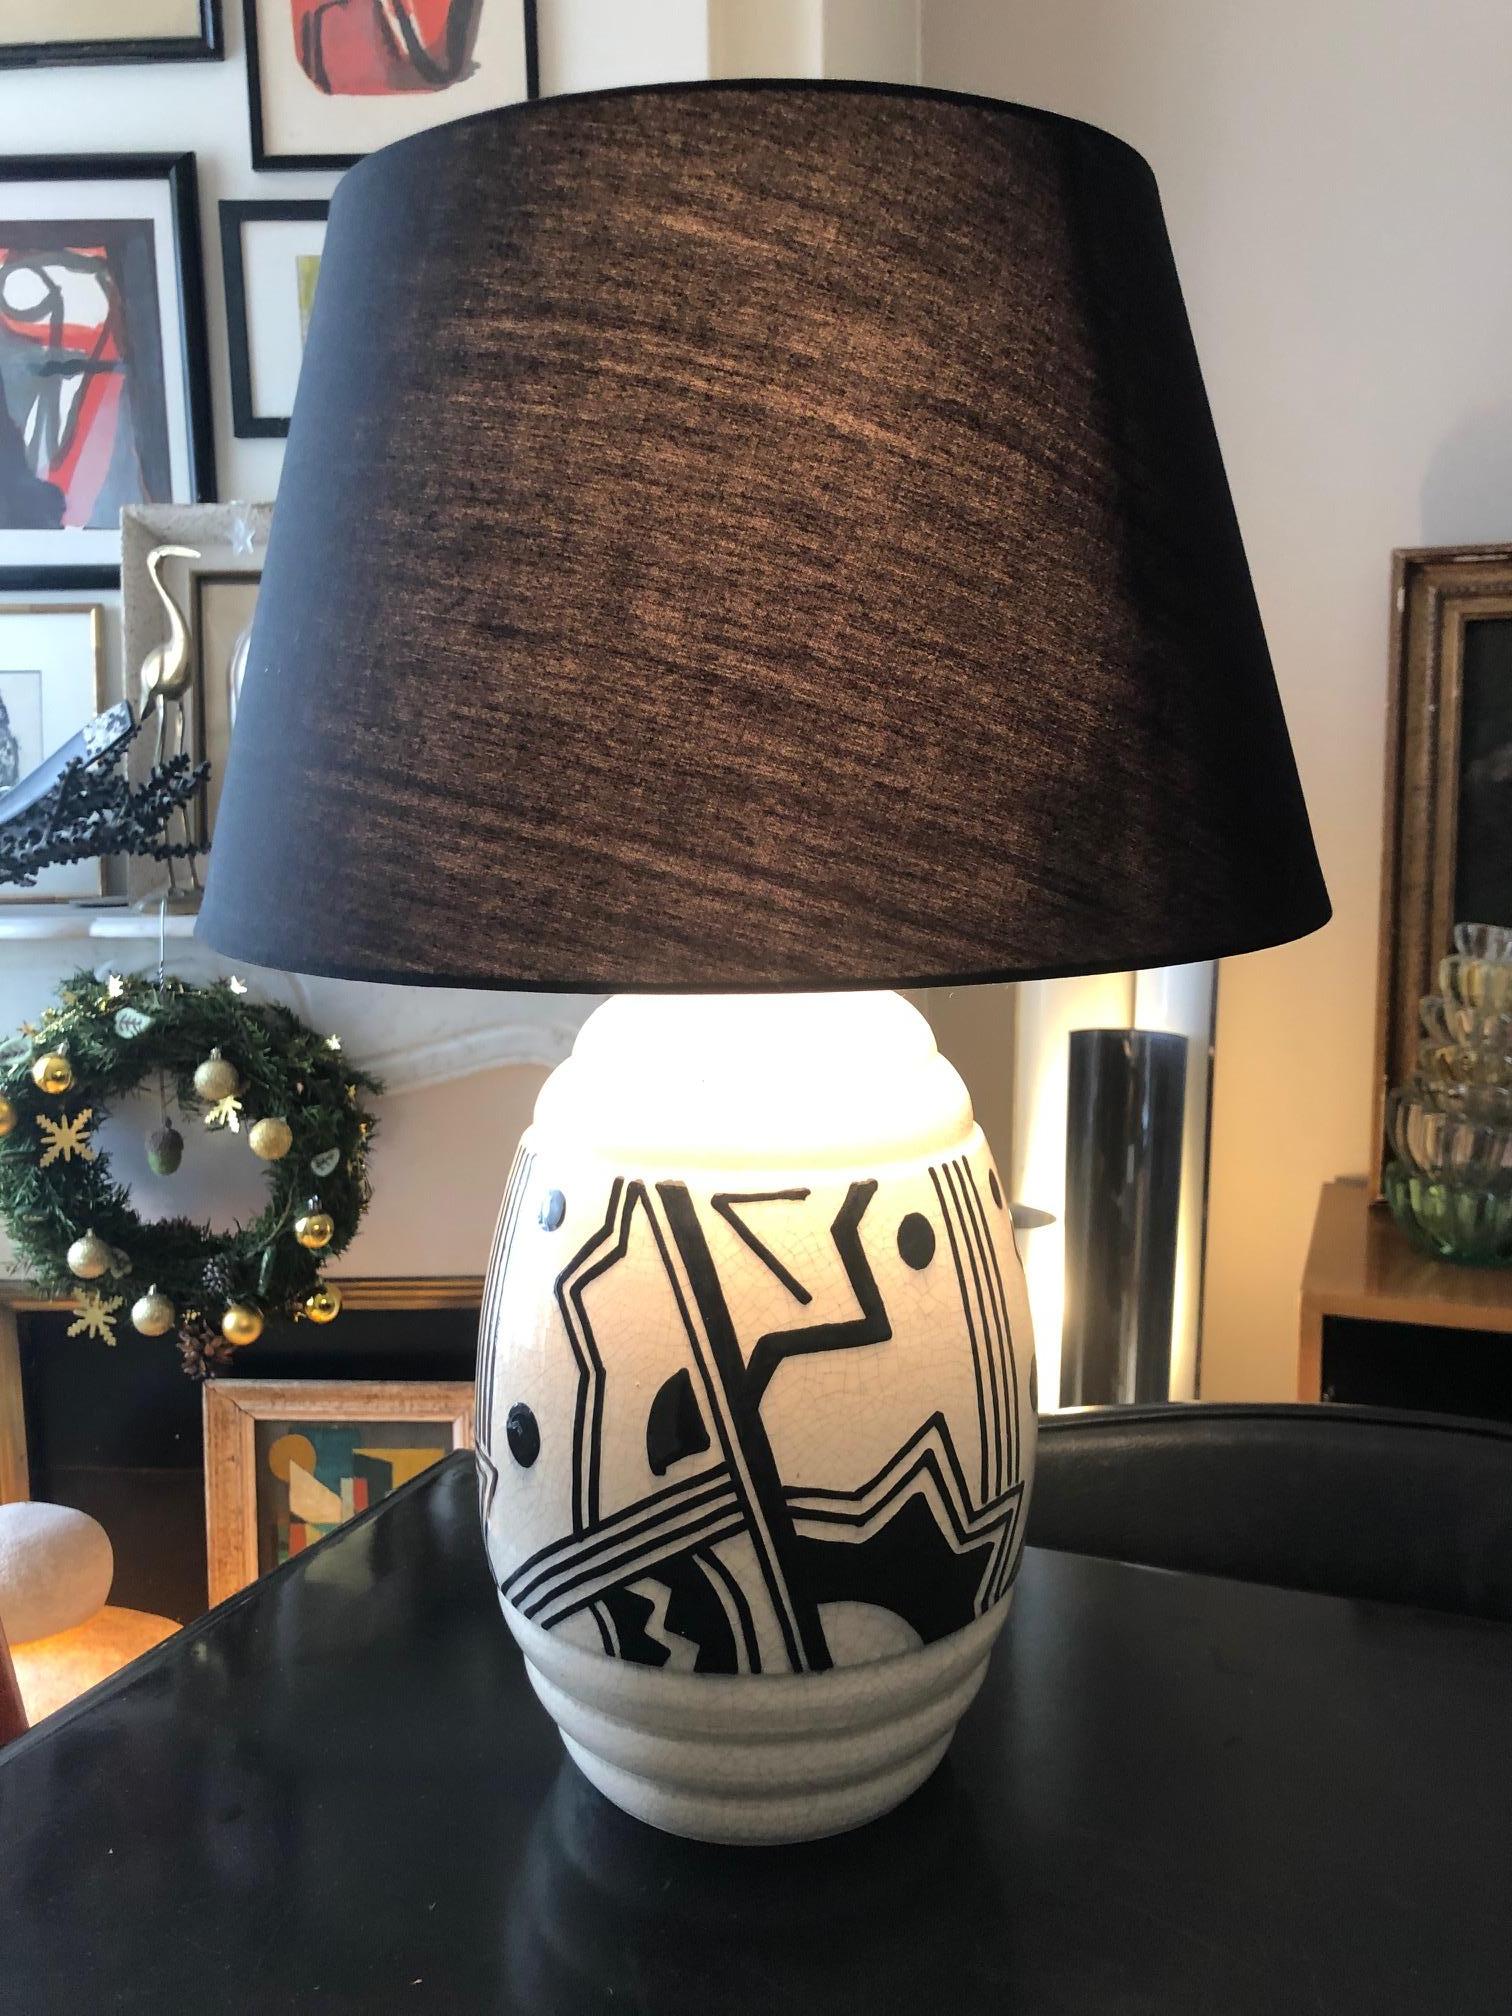 Beautiful graphic lamp from the 1930's, glazed crackled ceramic base 
New shade.